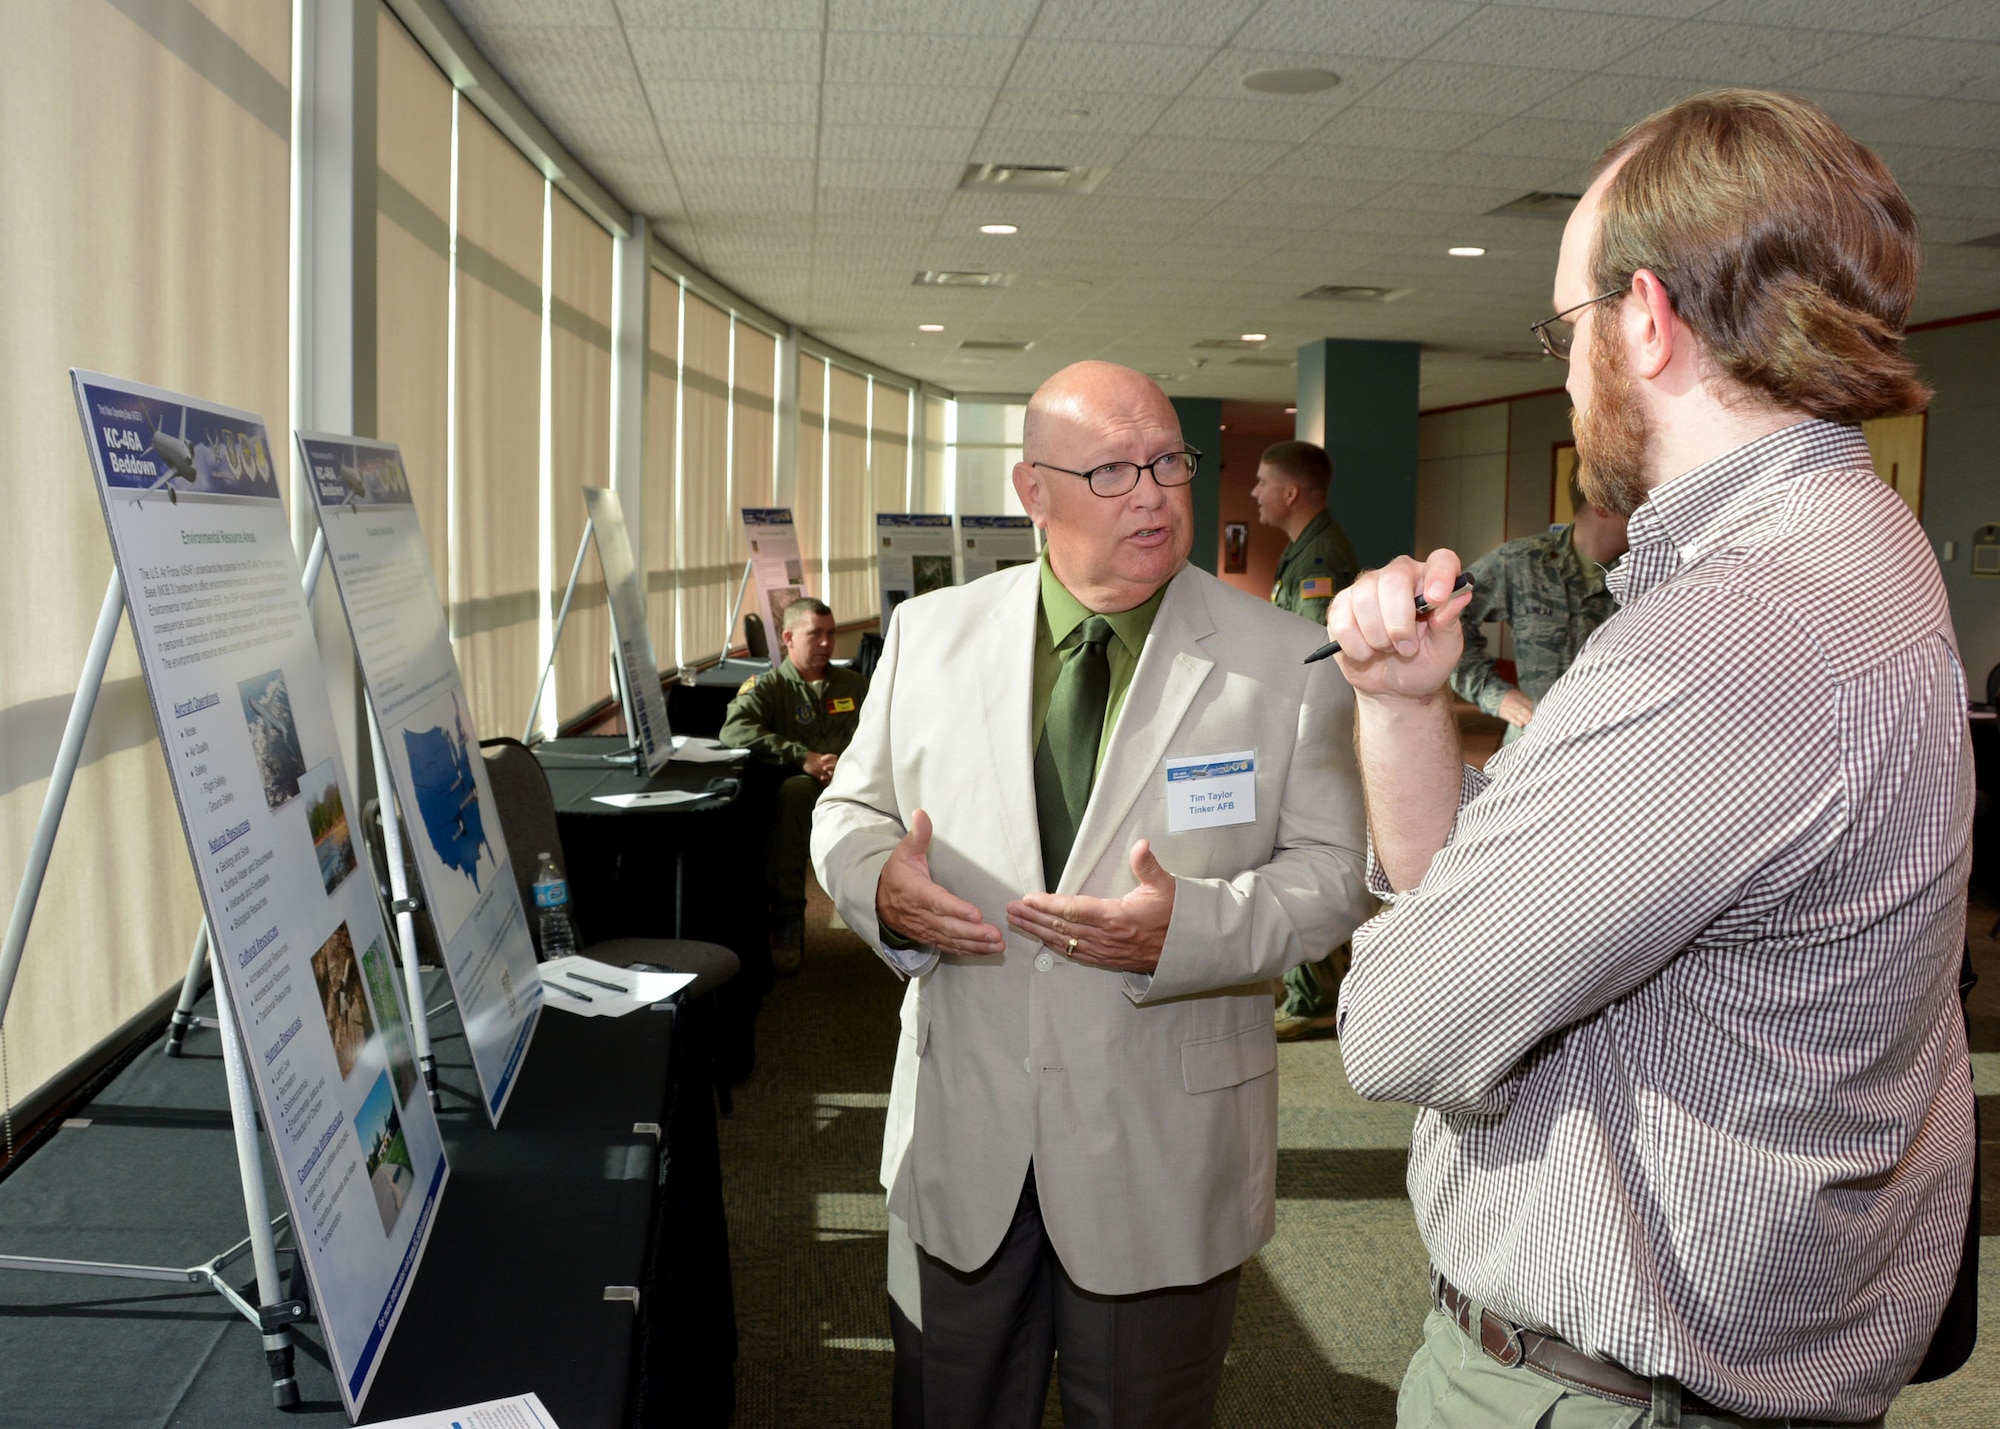 Tim Taylor, an Environmental Health Specialist with the 72nd Air Base Wing Civil Engineer Environmental Compliance Office at Tinker Air Force Base, Okla., briefs a local reporter at the KC-46A public scoping meeting April 21, 2016, at the Sheraton Reed Conference Center in Midwest City, Okla. (U.S. Air Force photo/Tech. Sgt. Lauren Gleason)